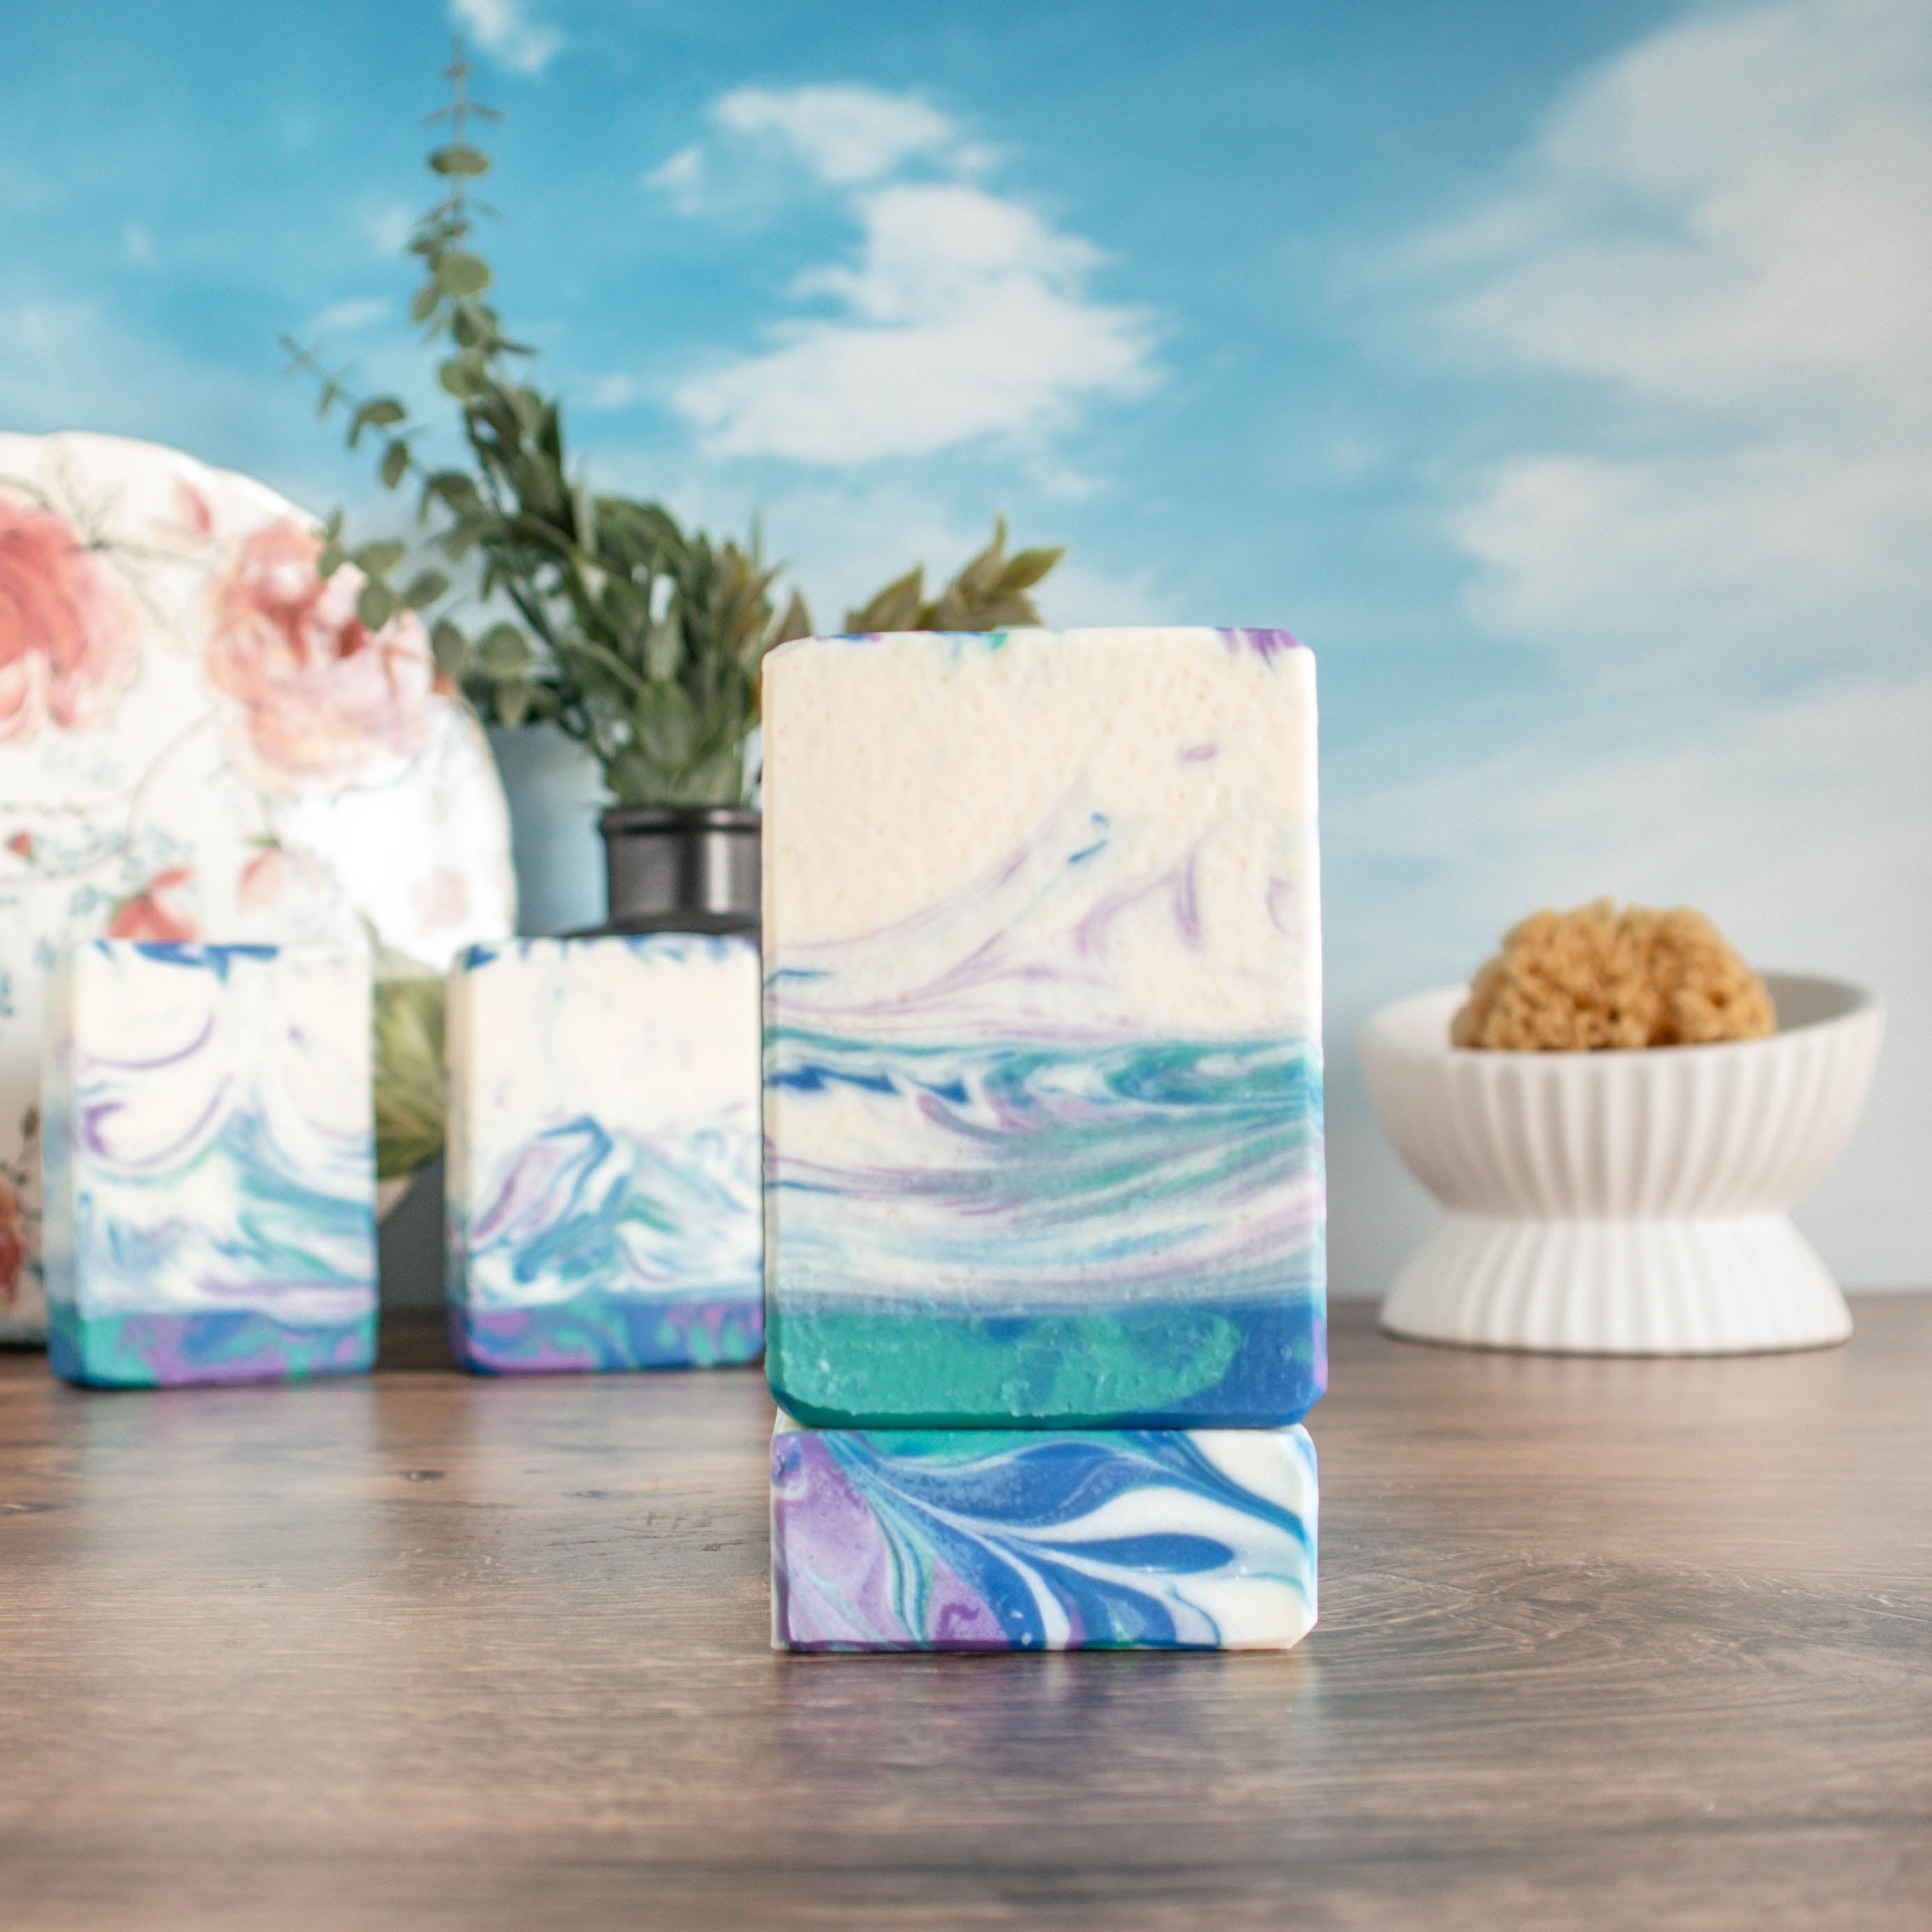 Irish Rains soap, one showing the face and the very pretty colors of purple green and blue swirls standing on another to show the swirled top. Two more are in the back left in front of a floral plate. In the back right is a white soap dish with a loofah There is a pretty sky background.